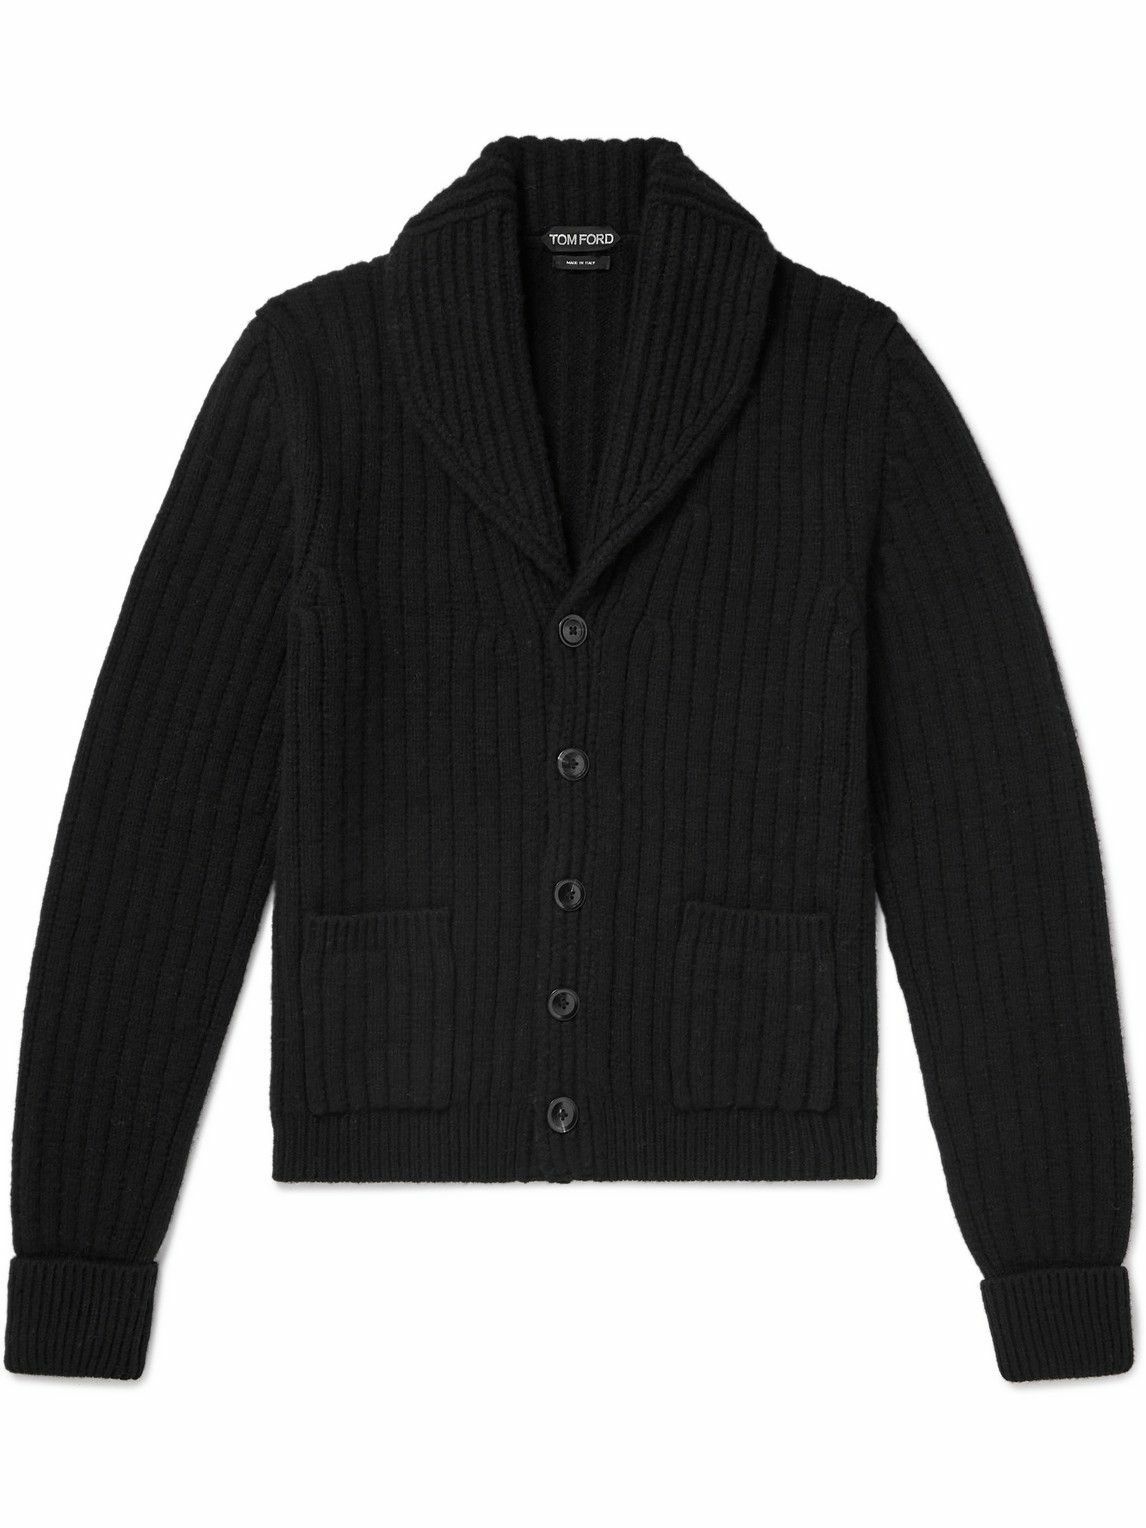 TOM FORD - Shawl-Collar Ribbed Wool and Cashmere-Blend Cardigan - Black ...